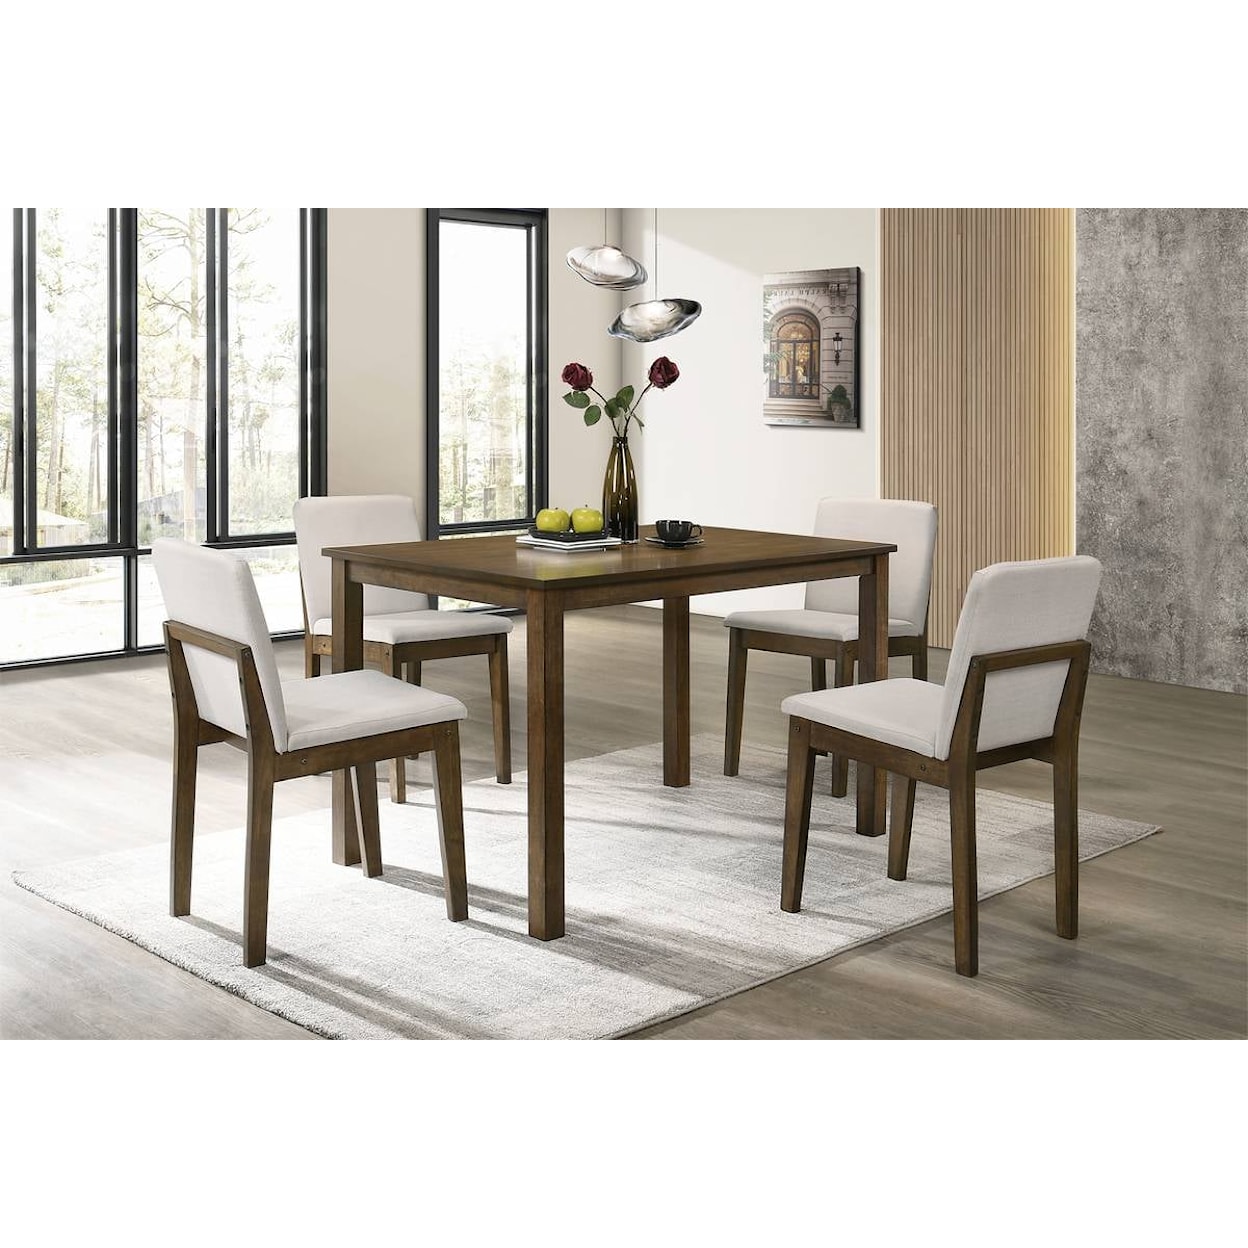 Poundex Kylie KYLIE BROWN 5 PIECE DINING SET |